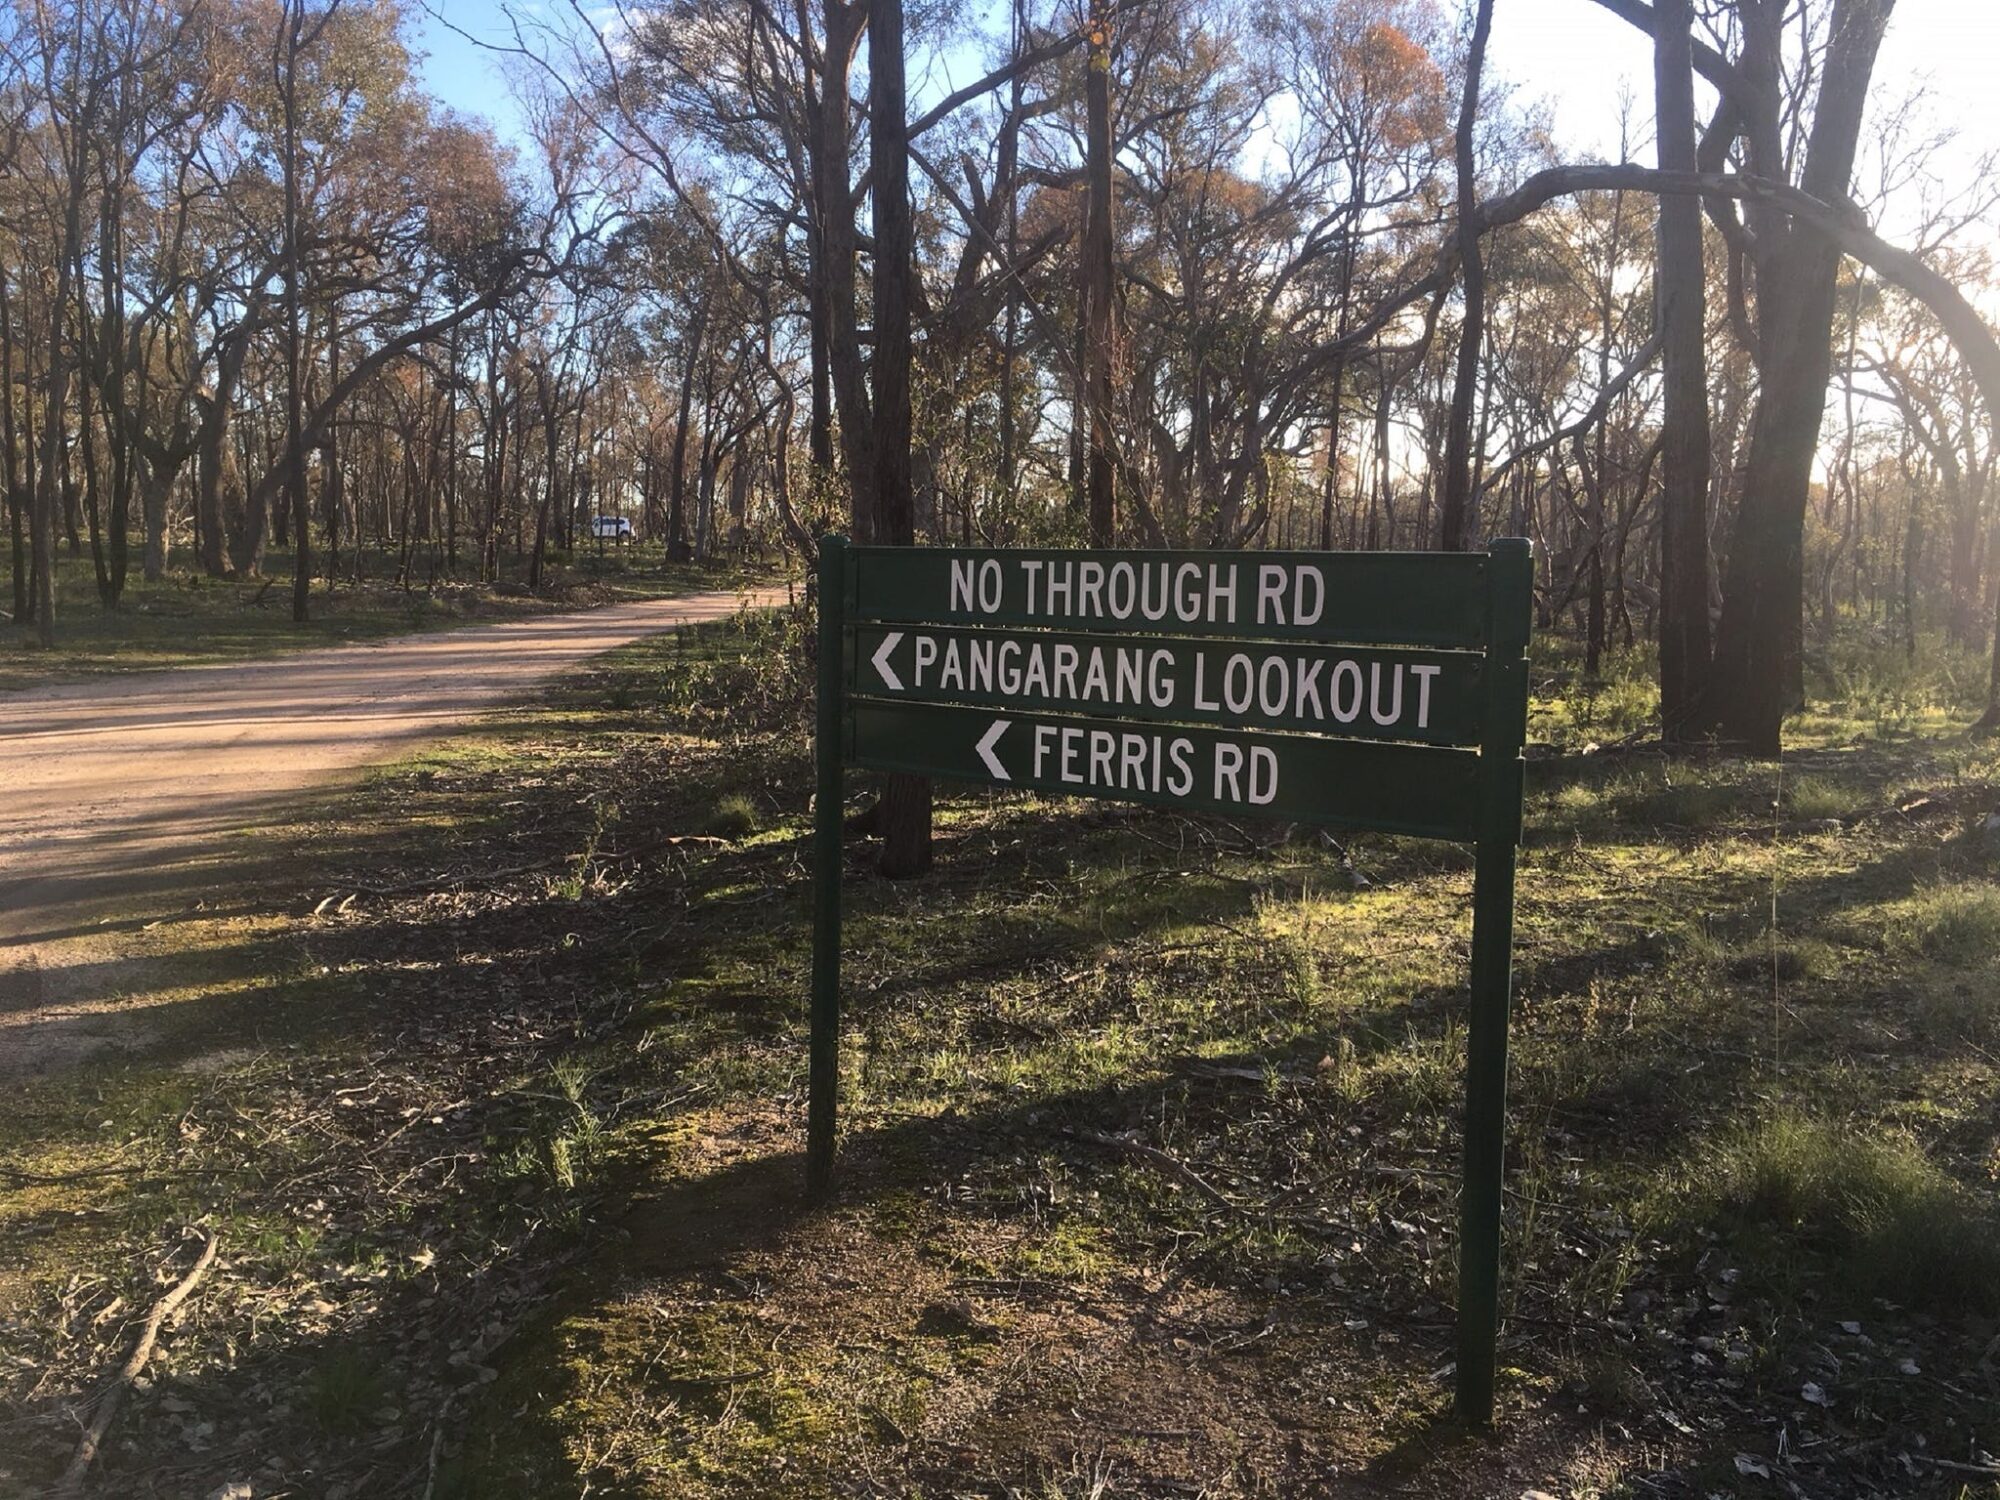 Sign showing direction of walk, dirt driving track, trees lining side of road, sunny day.